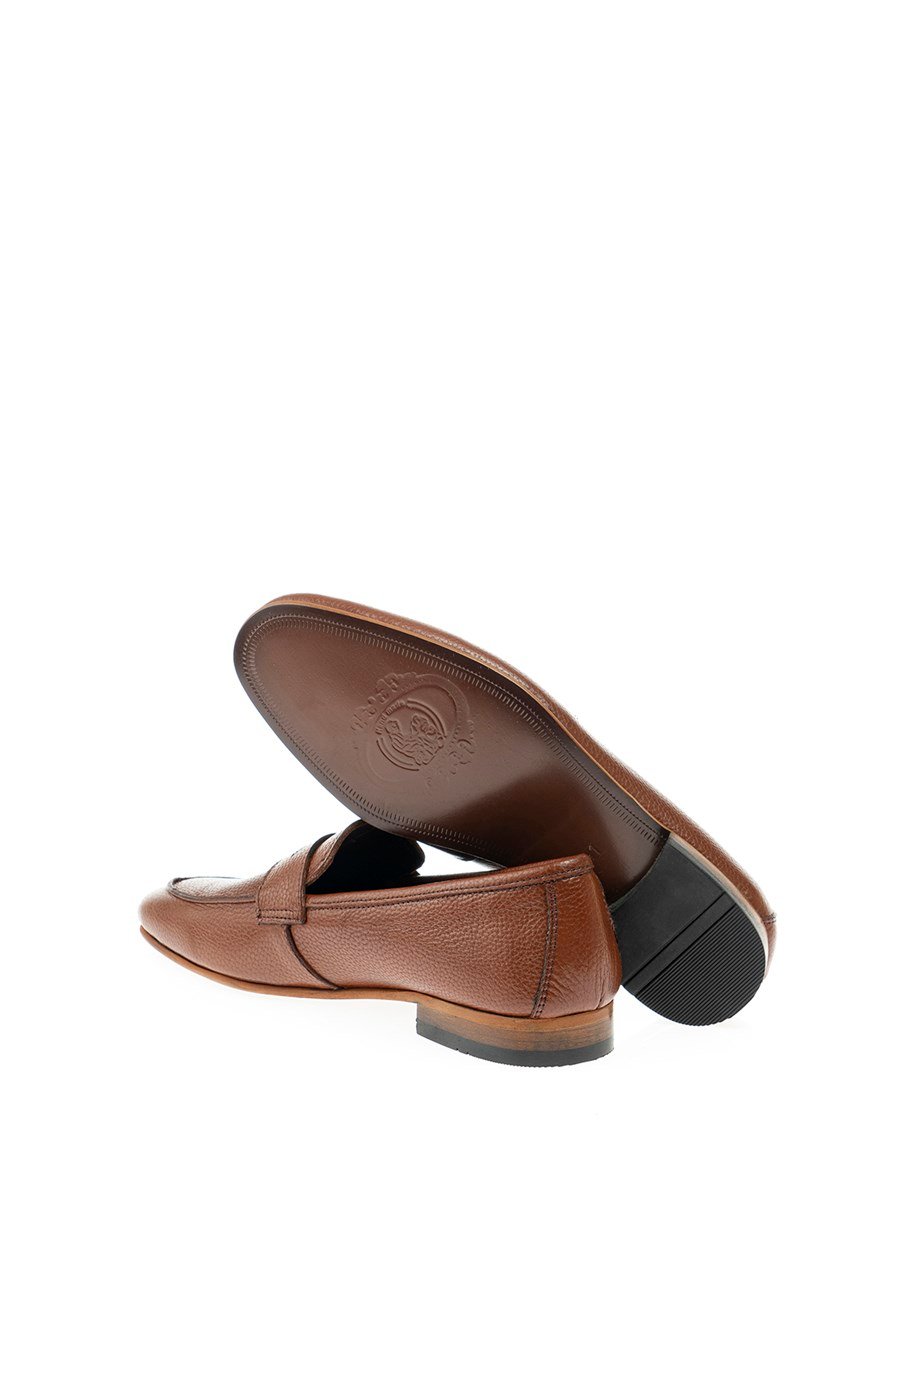 Tan Grainy penny Loafer